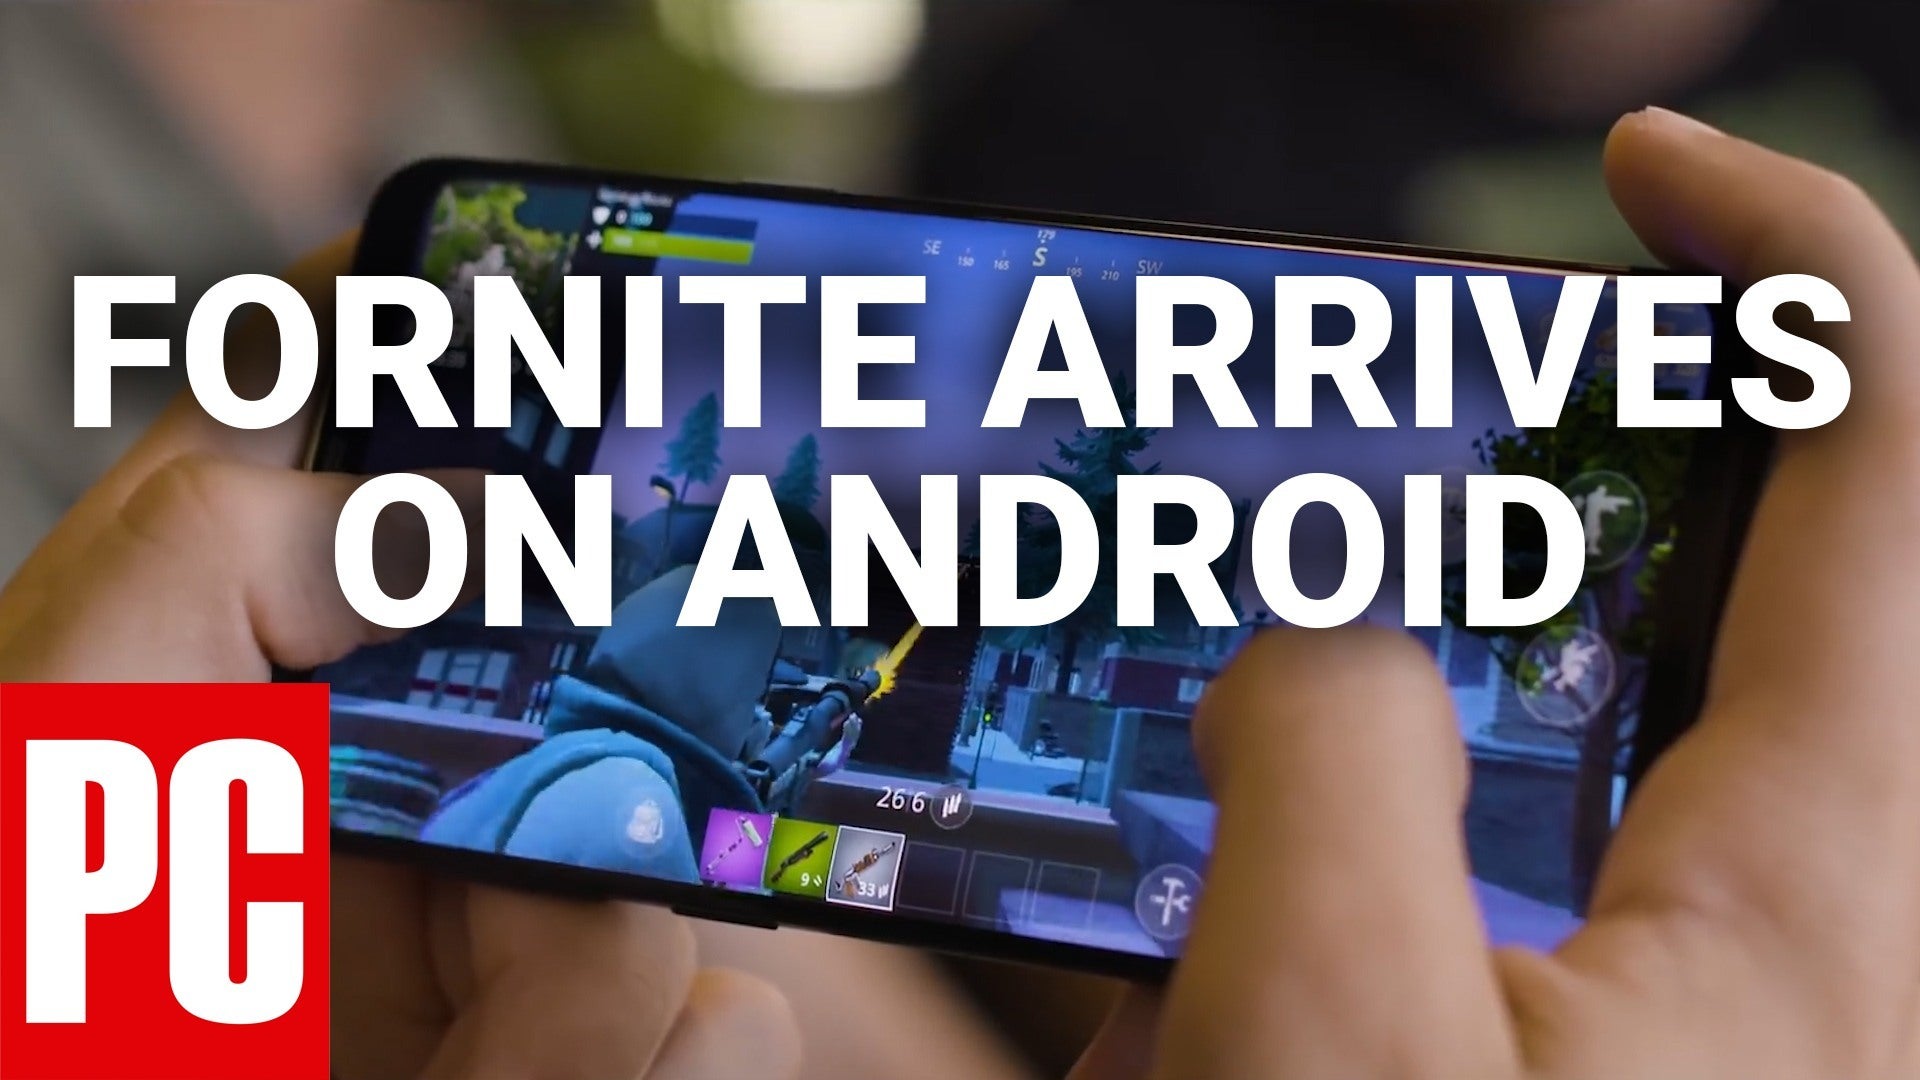 Fornite Finally Arrives on Android